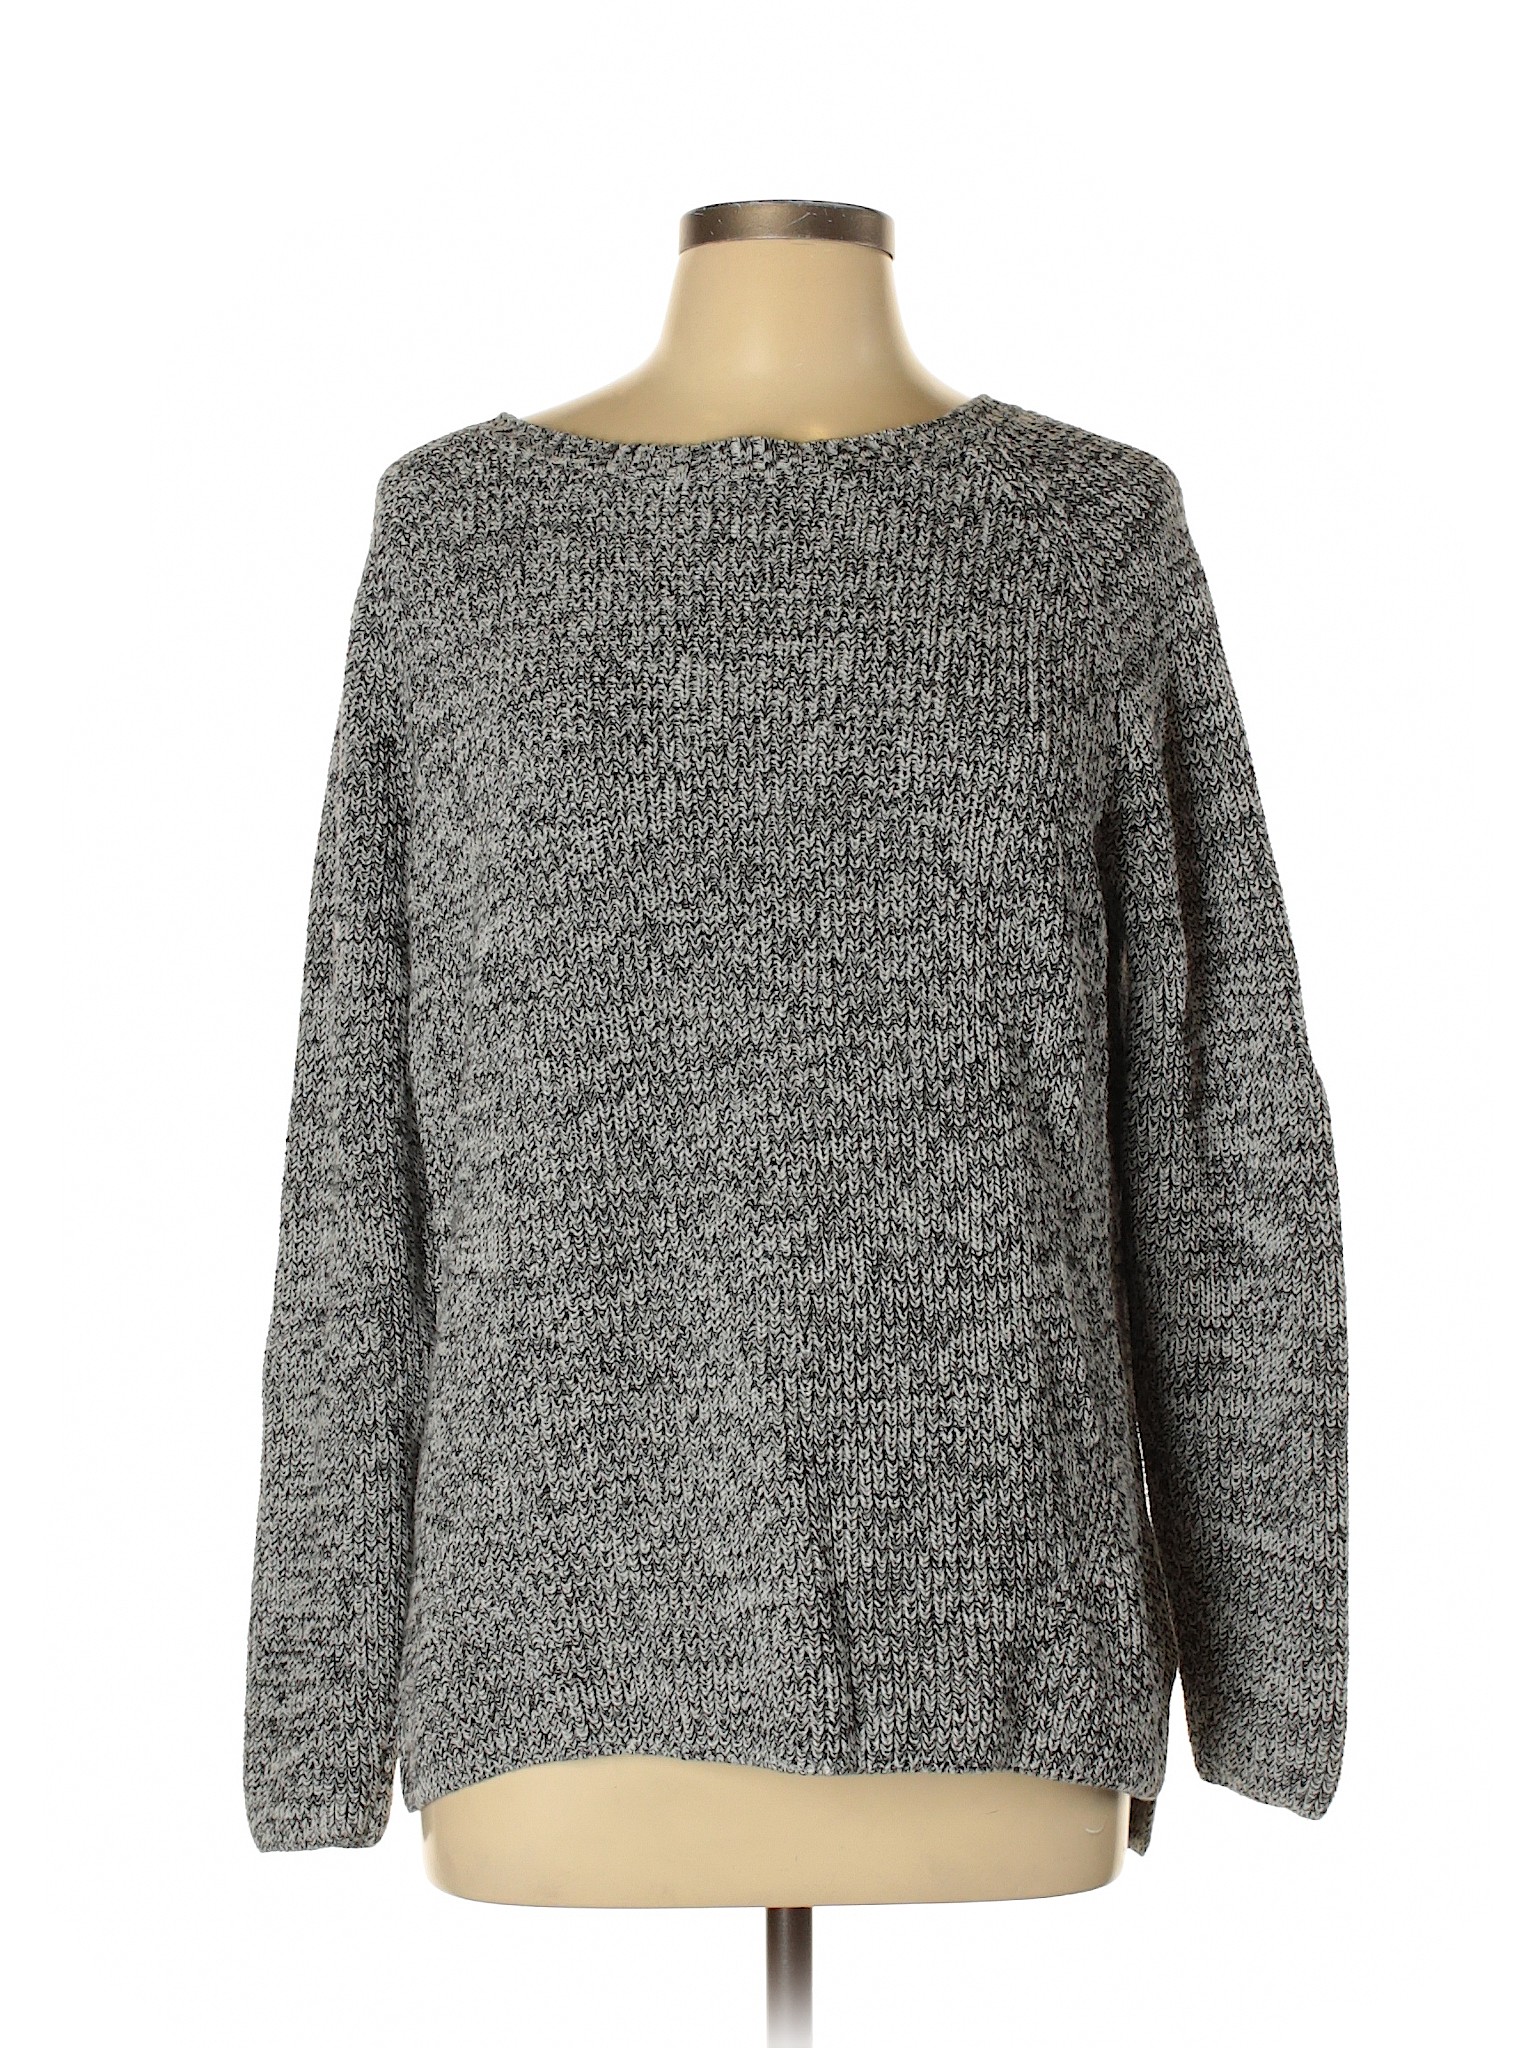 Coldwater Creek 100% Cotton Solid Grey Gray Pullover Sweater Size L ...